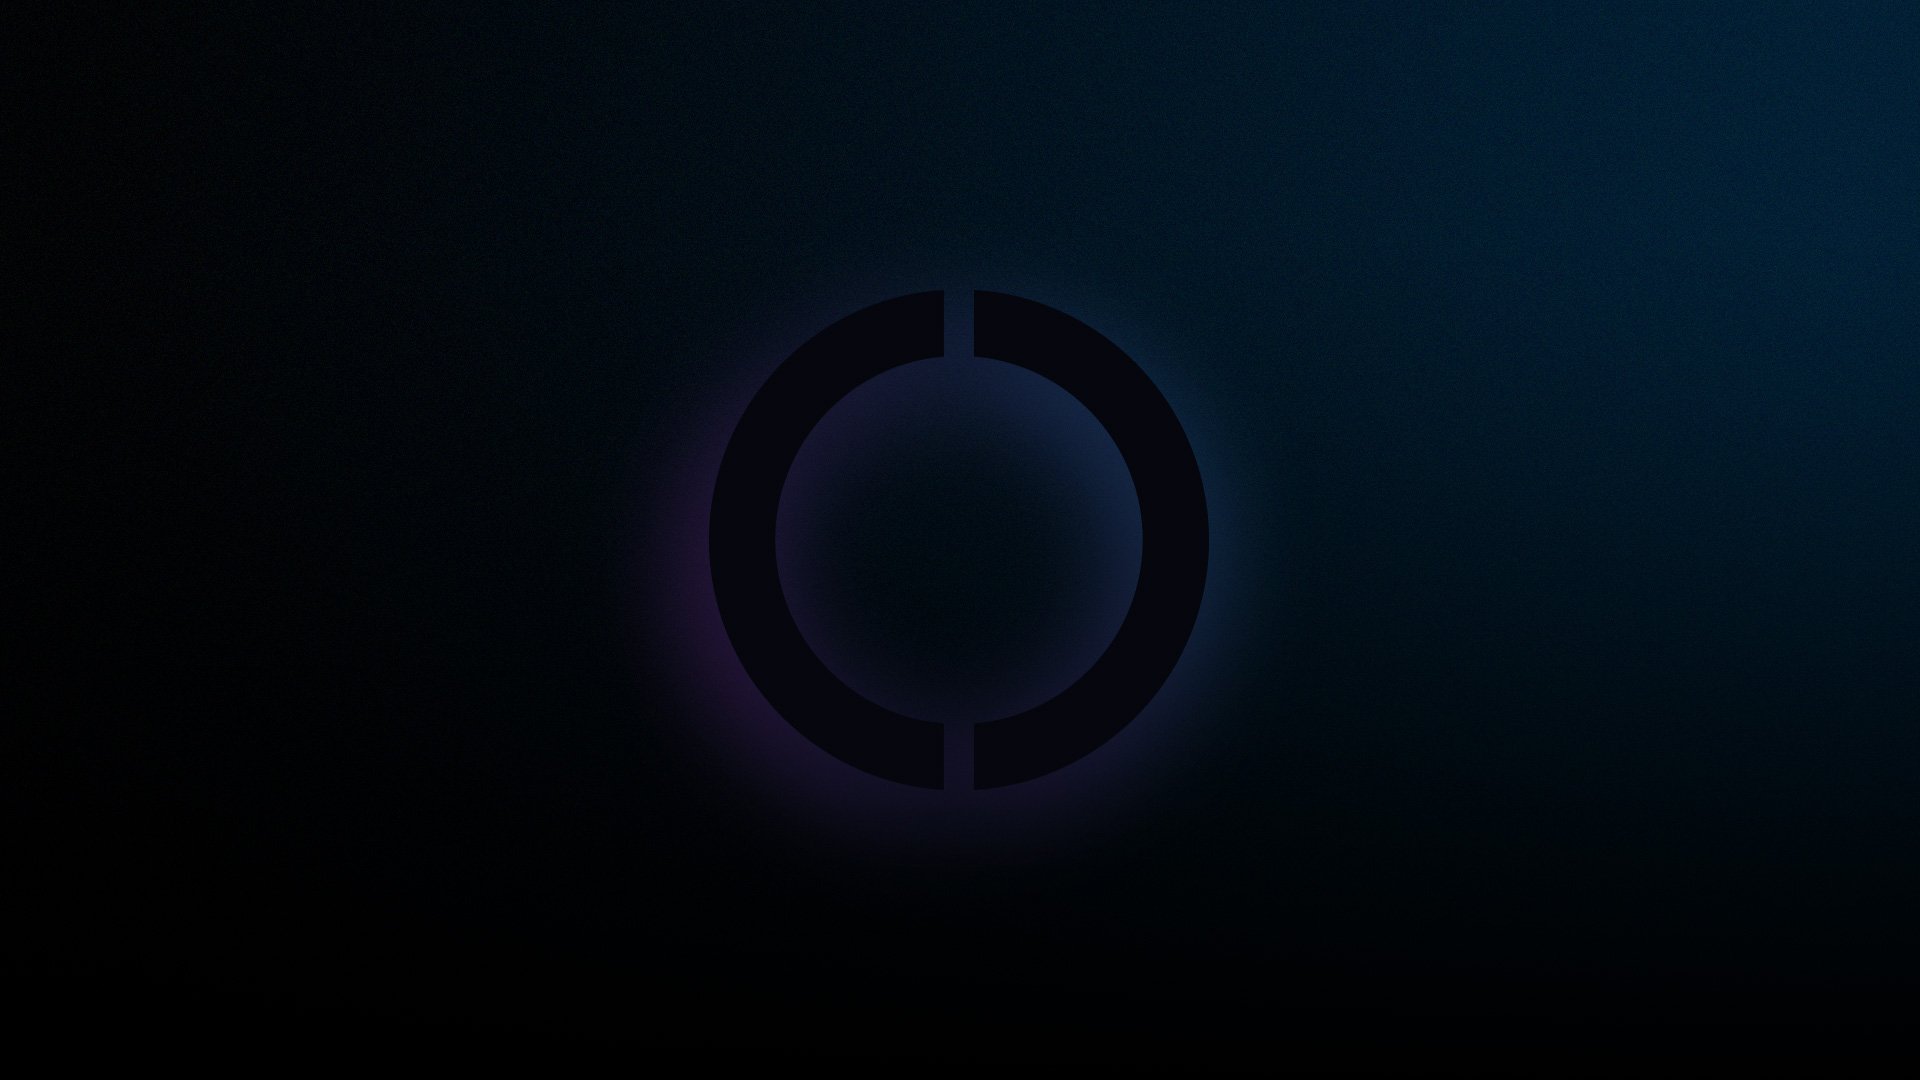 SteamOS: What we know so far and what to expect · SteamDB